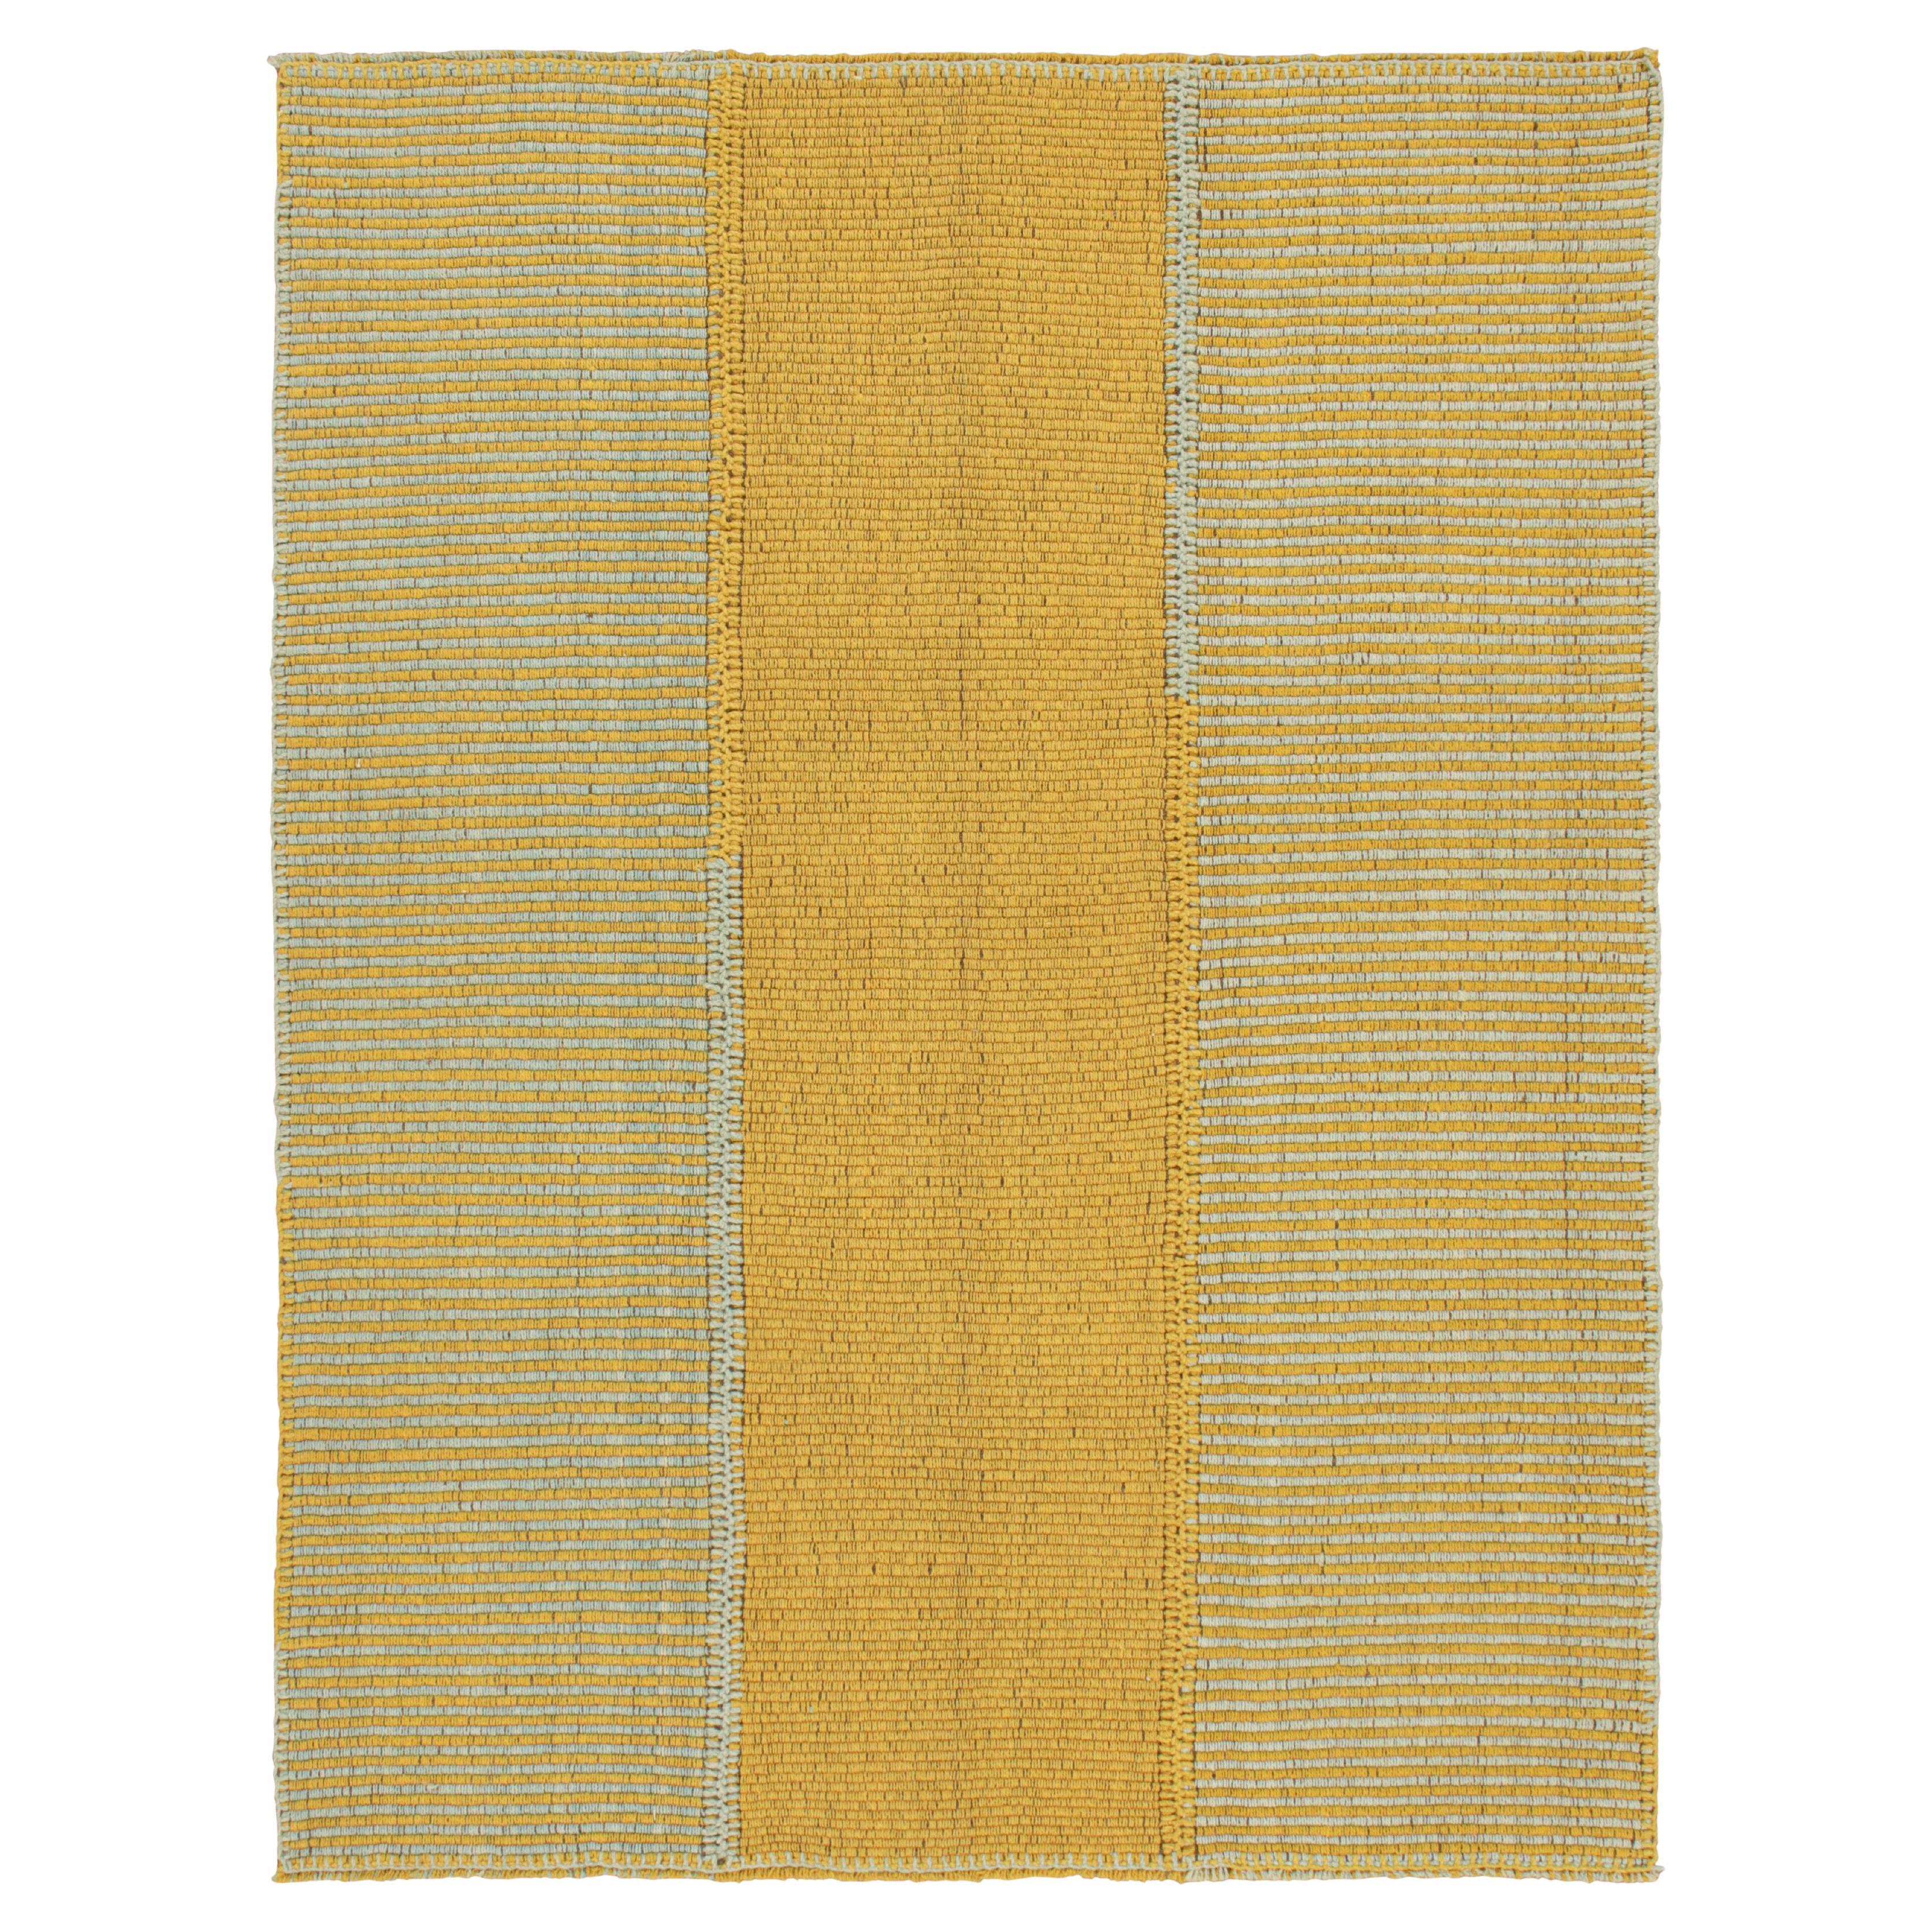 Rug & Kilim’s Contemporary Kilim in Gold and Blue Textural Stripes